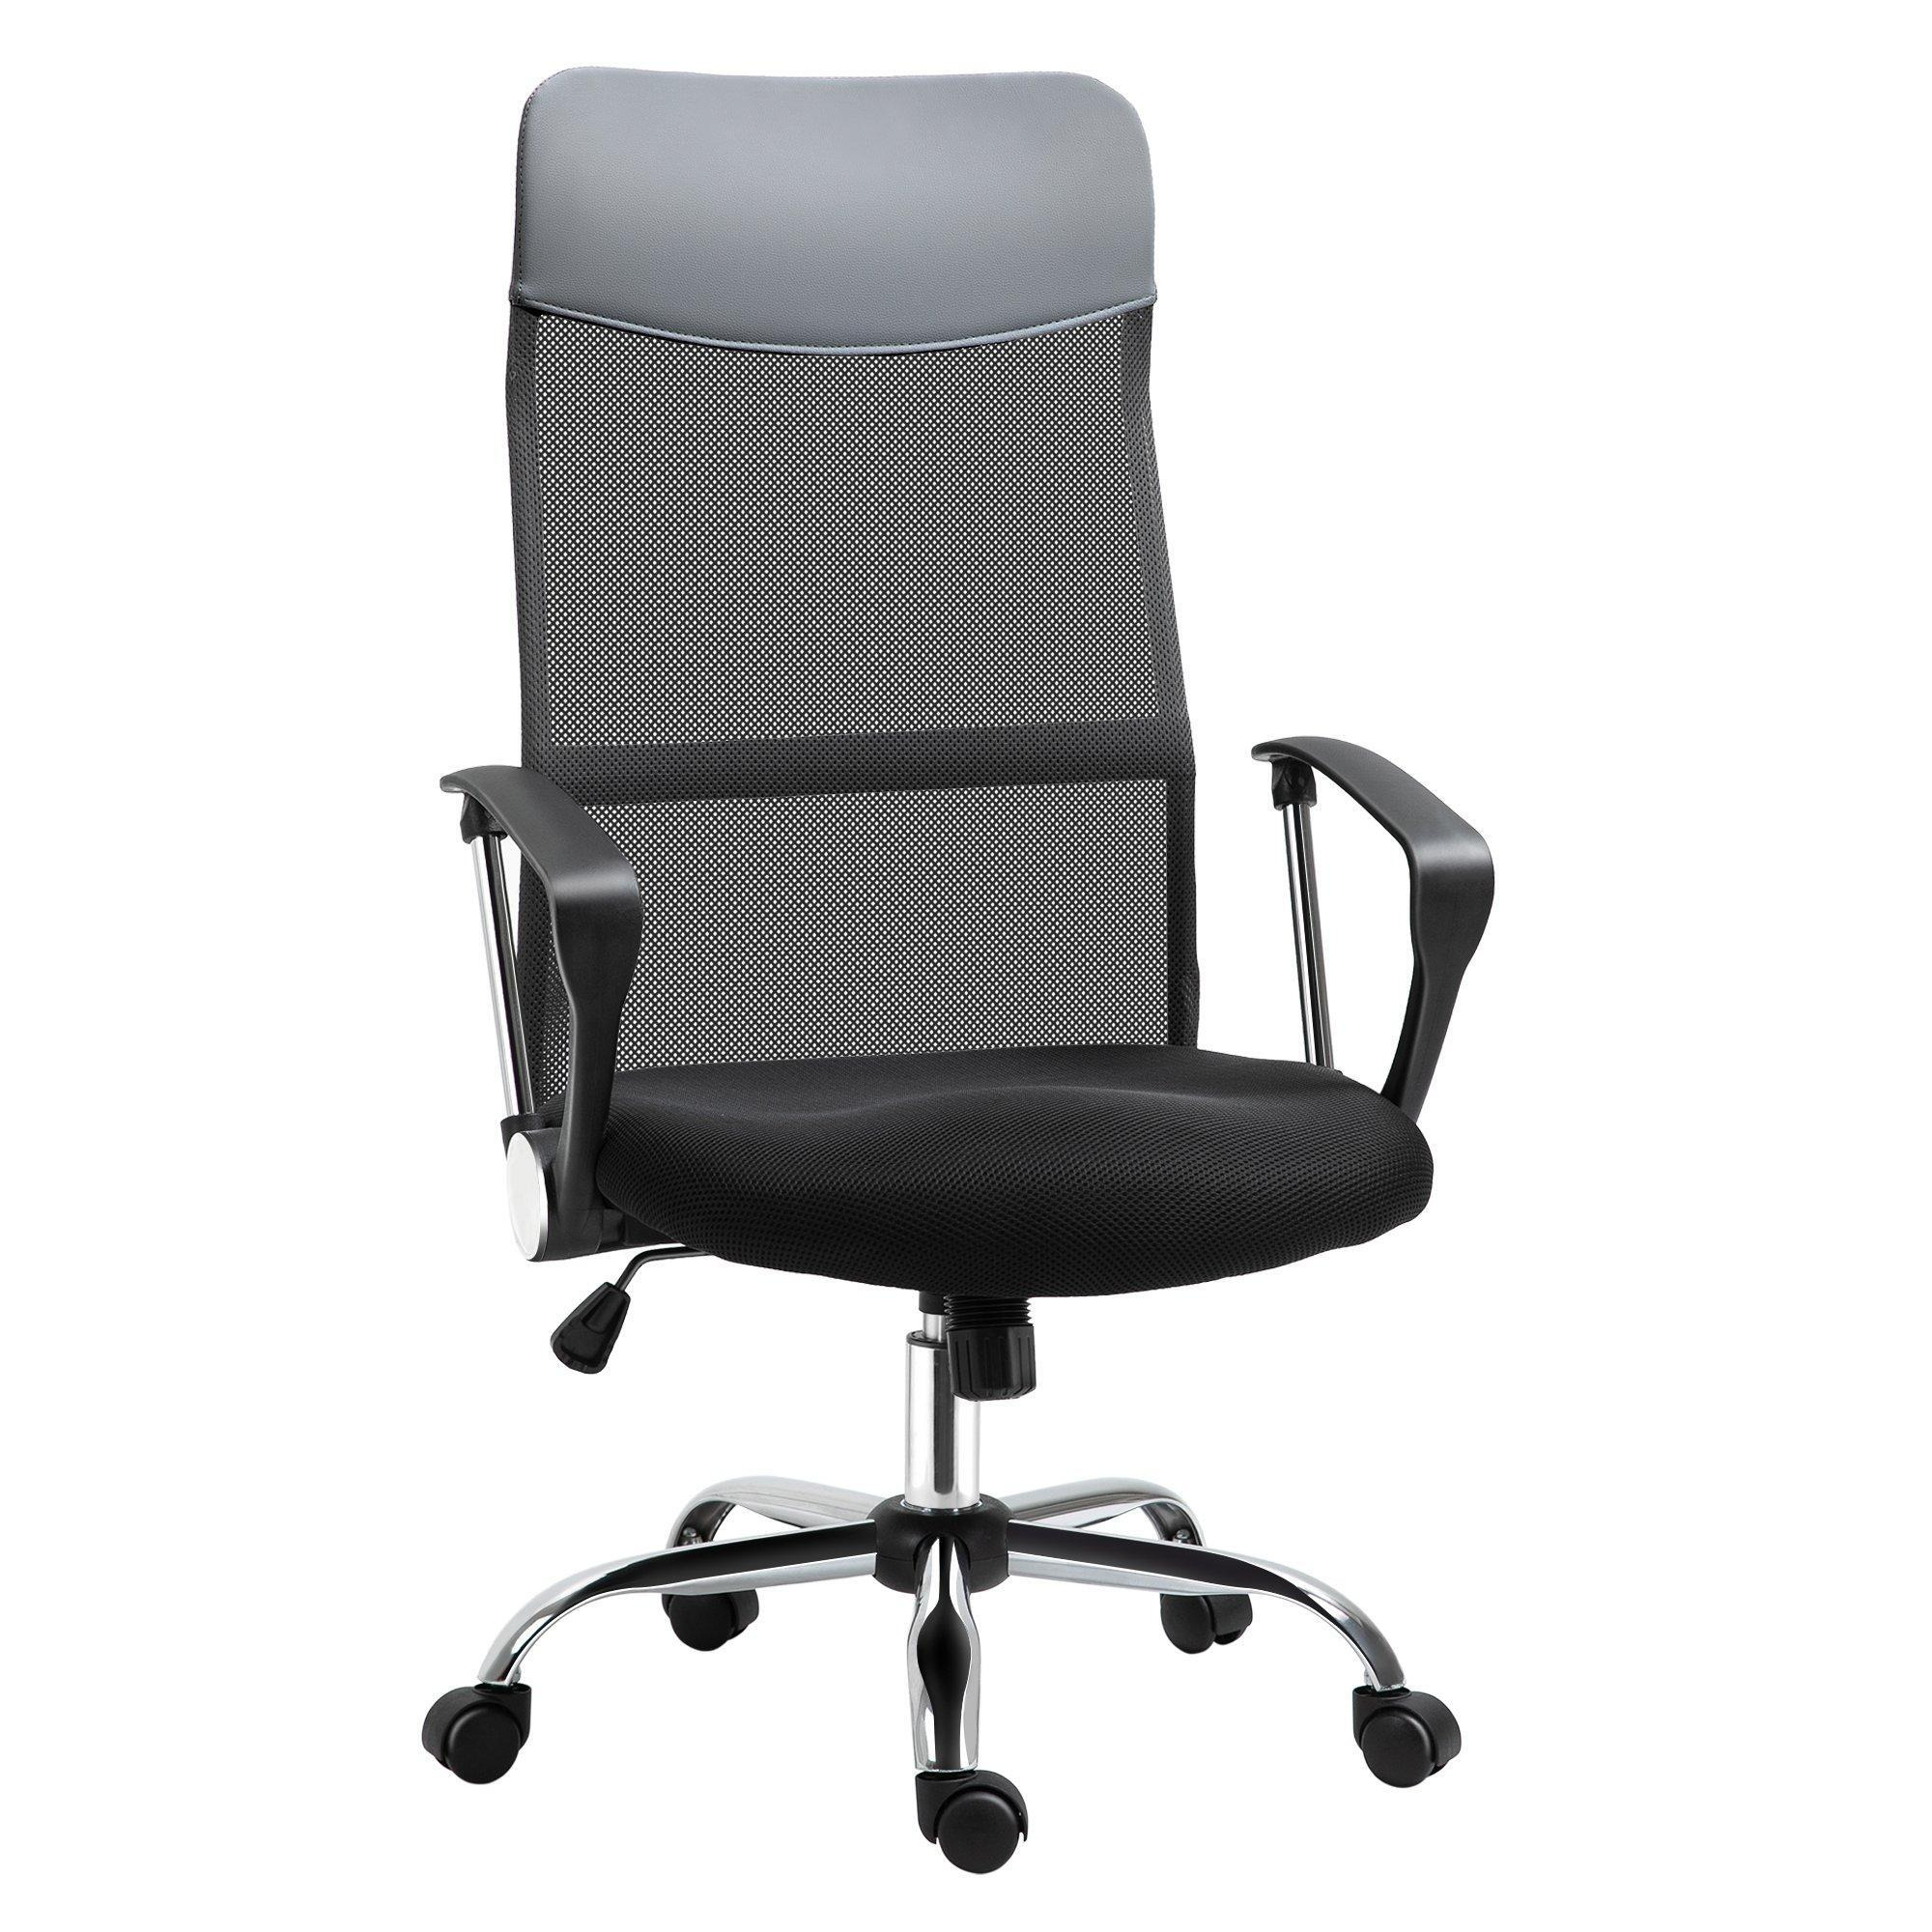 Executive Office Chair High Back Mesh Chair Seat Office Desk Chairs - image 1